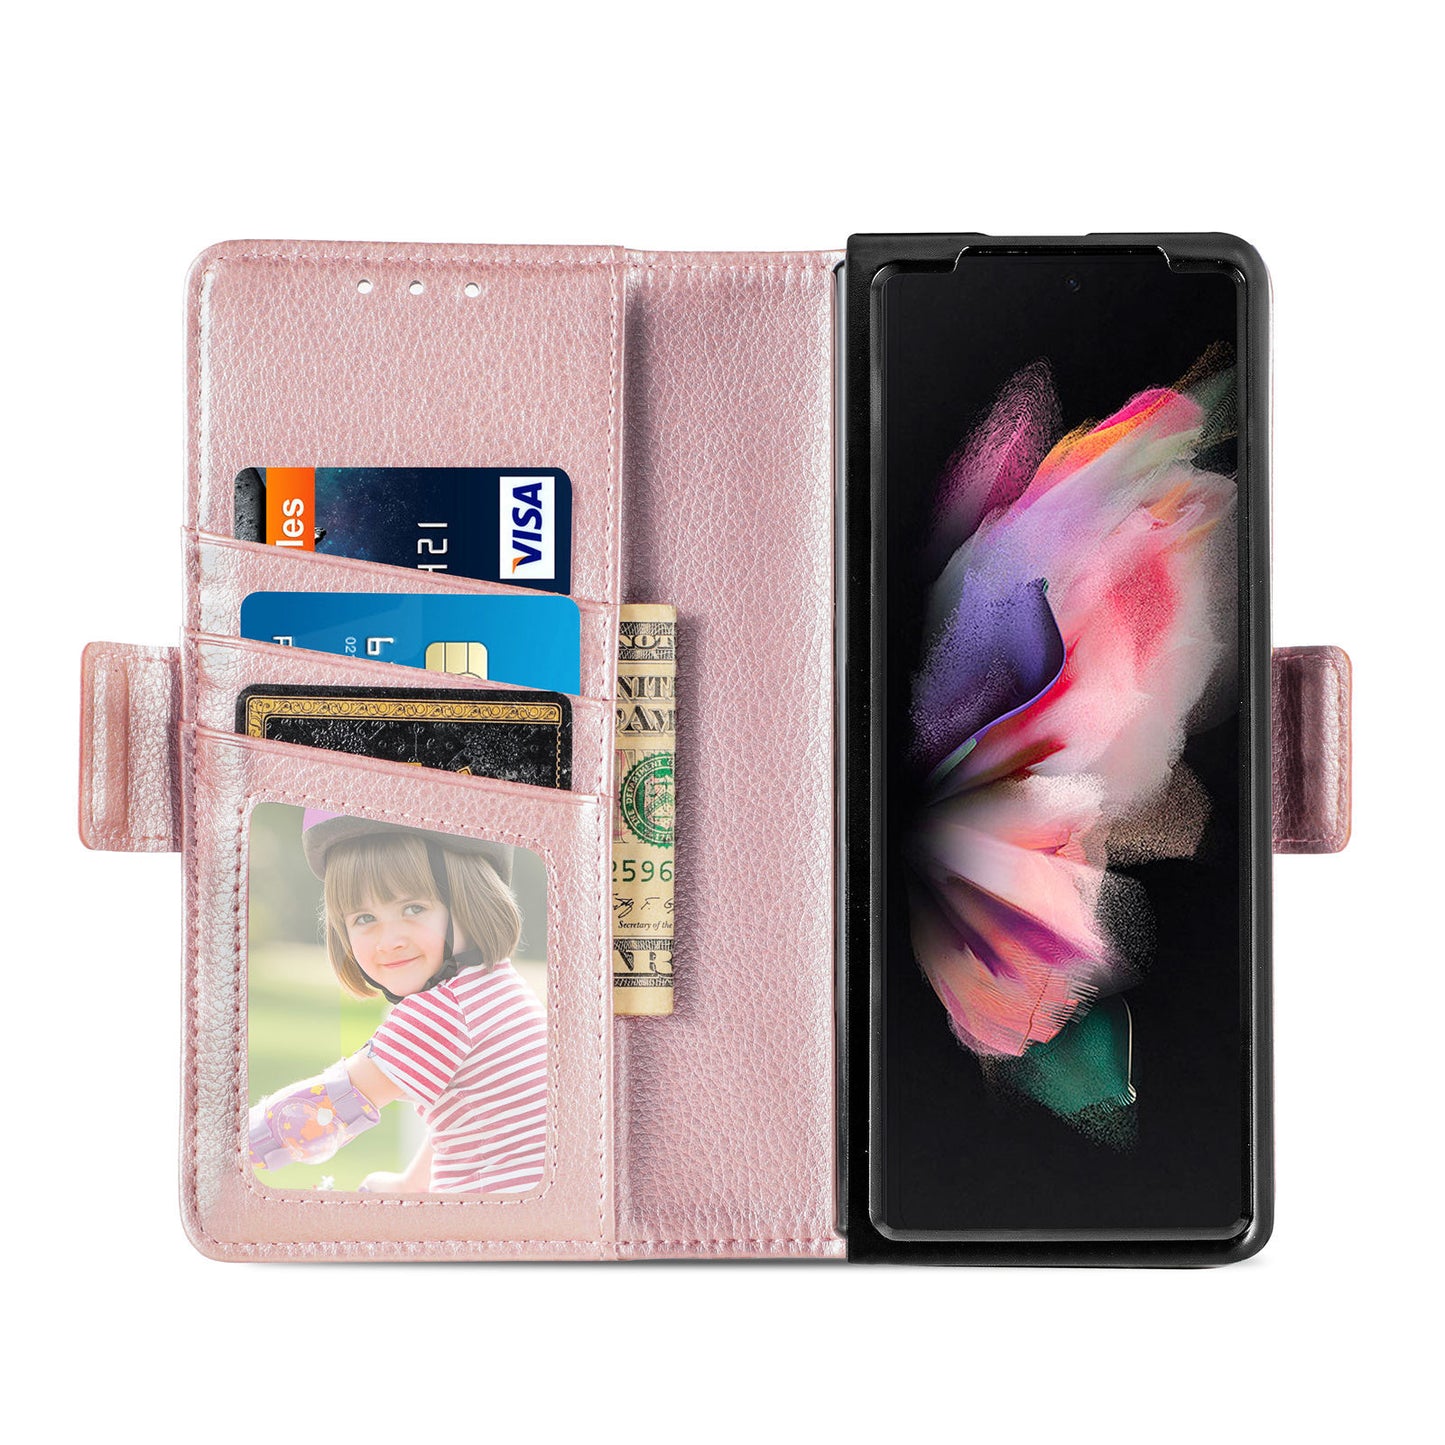 Faux Leather Case with Folding Screen, Pen Slot, and Multi-Card Cover for Samsung Galaxy Z Fold3 - CALCUMART